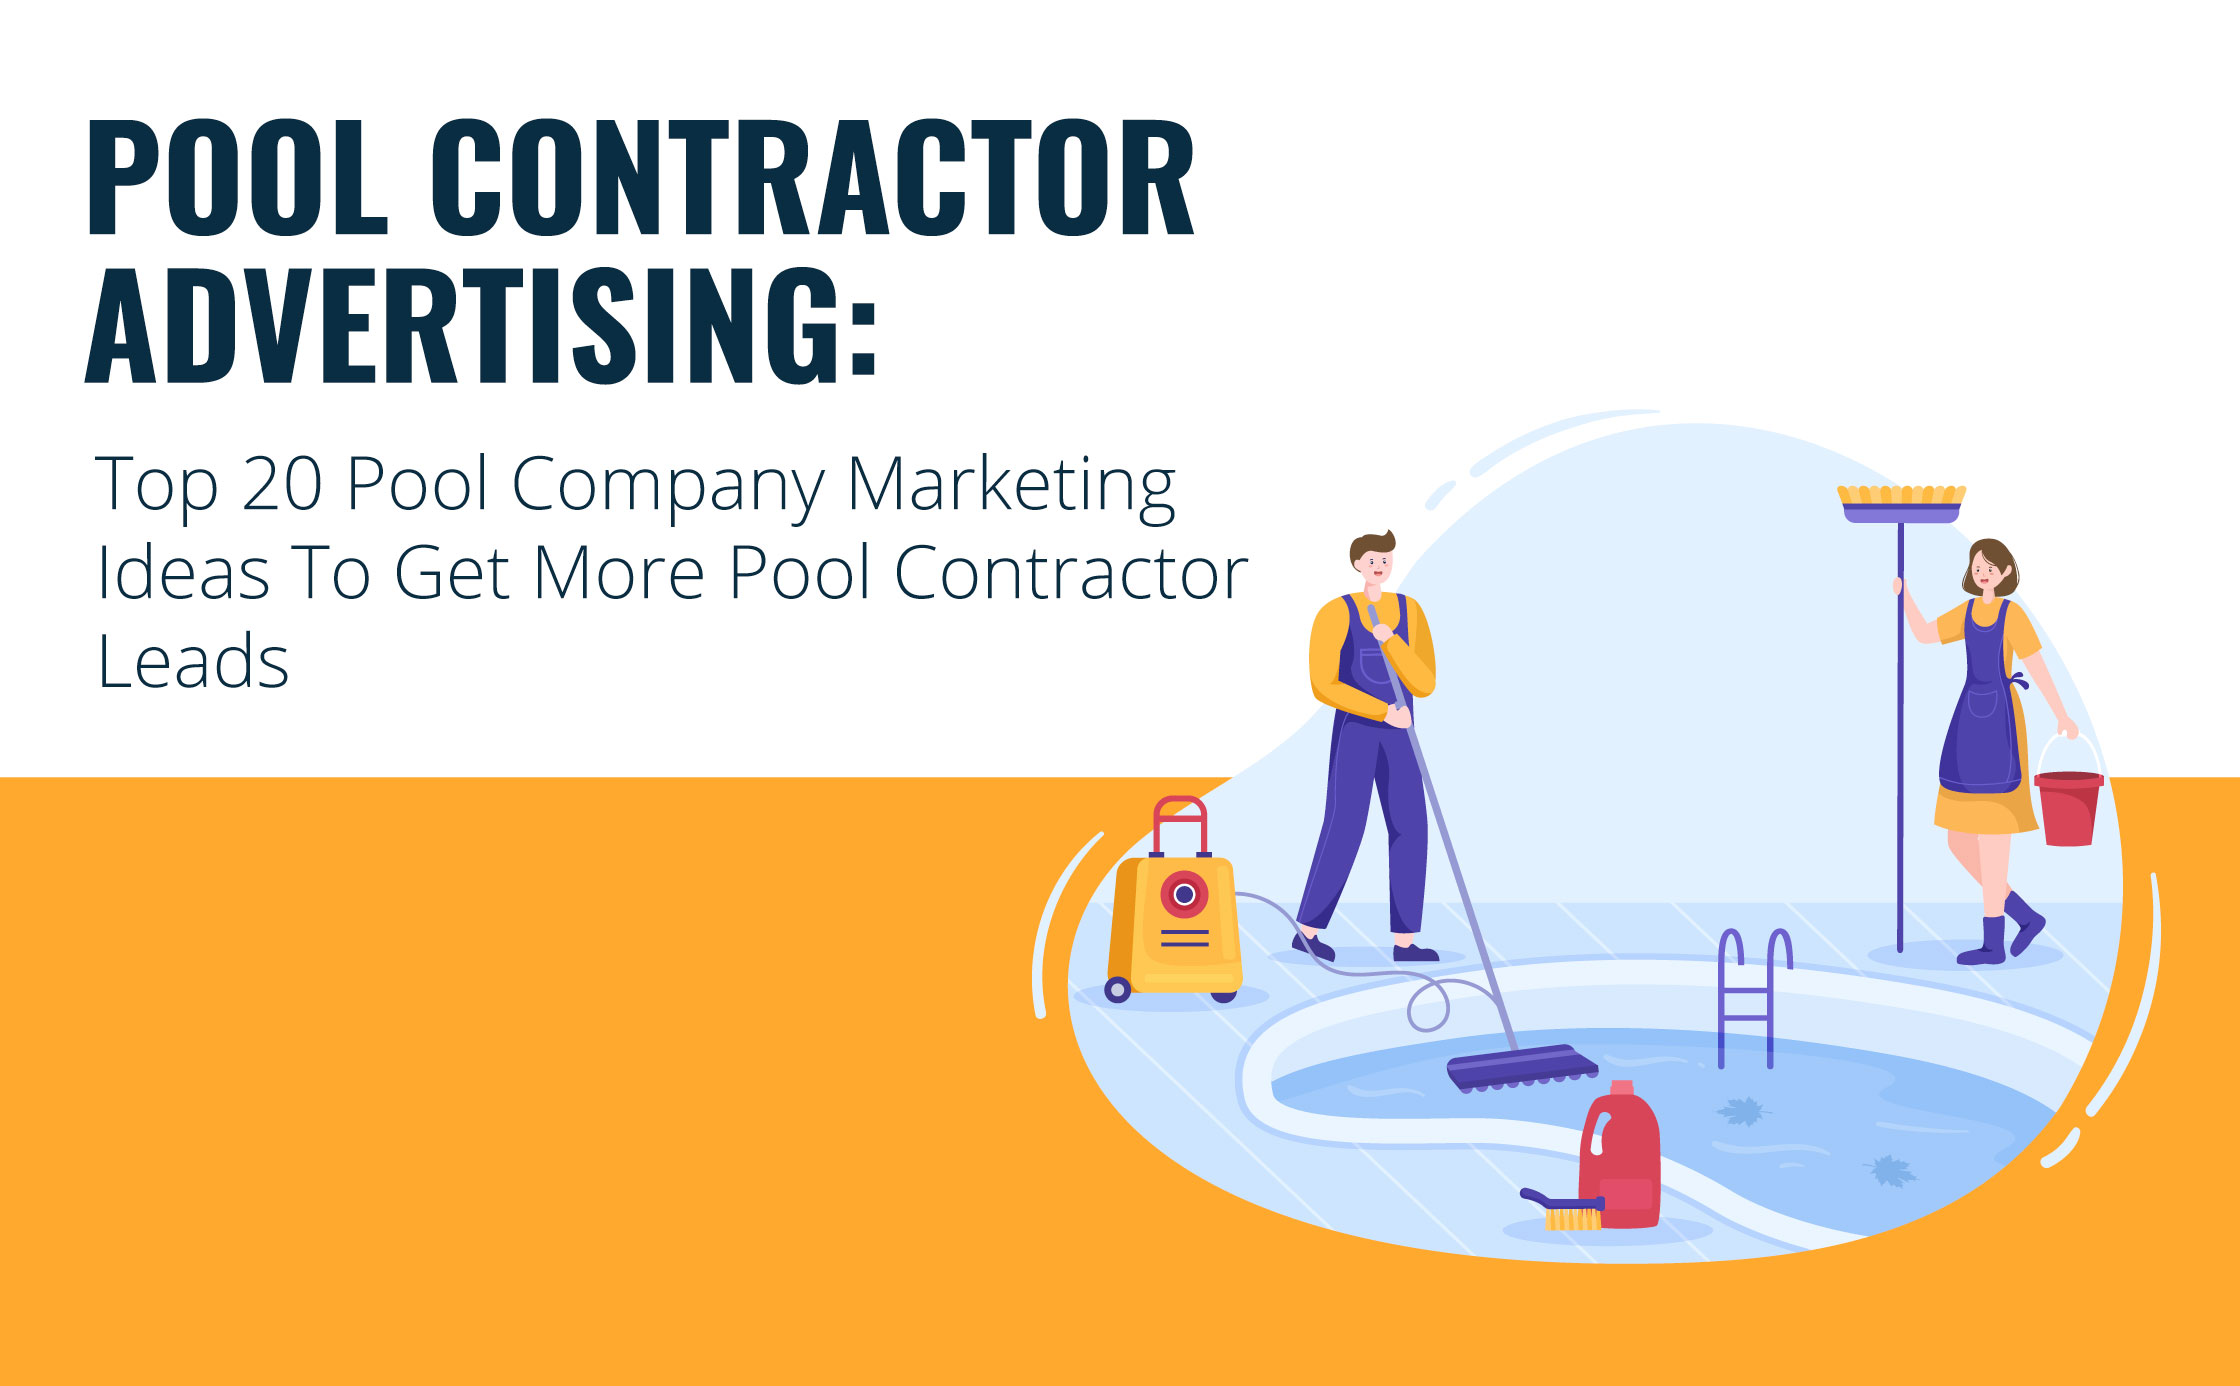 Pool Contractor Advertising: Top 20 Pool Company Marketing Ideas To Get More Pool Contractor Leads